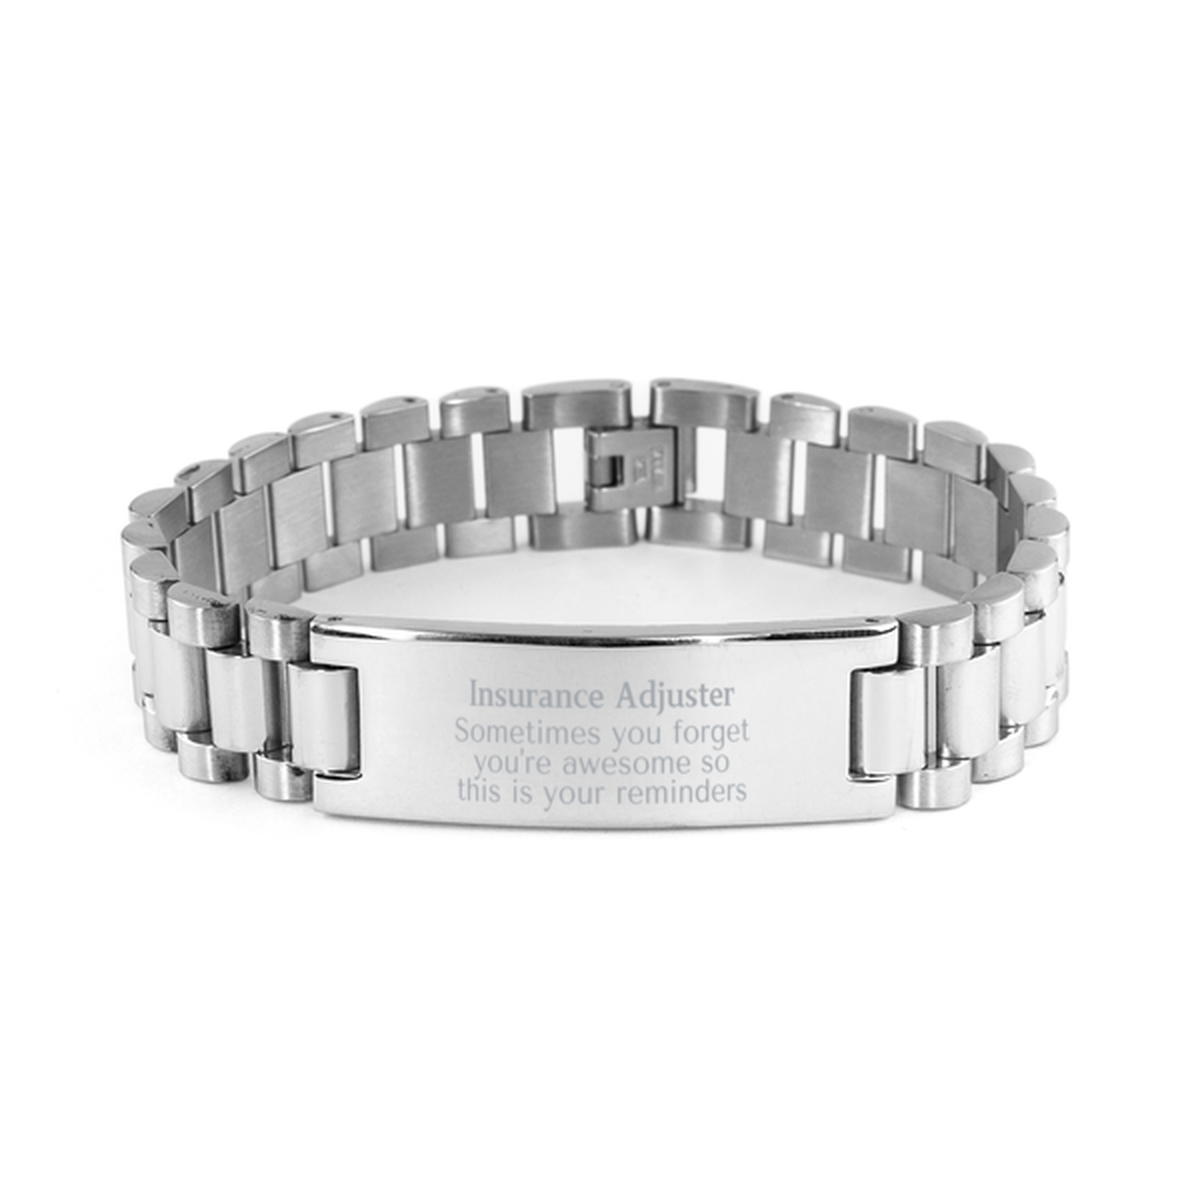 Sentimental Insurance Adjuster Ladder Stainless Steel Bracelet, Insurance Adjuster Sometimes you forget you're awesome so this is your reminders, Graduation Christmas Birthday Gifts for Insurance Adjuster, Men, Women, Coworkers